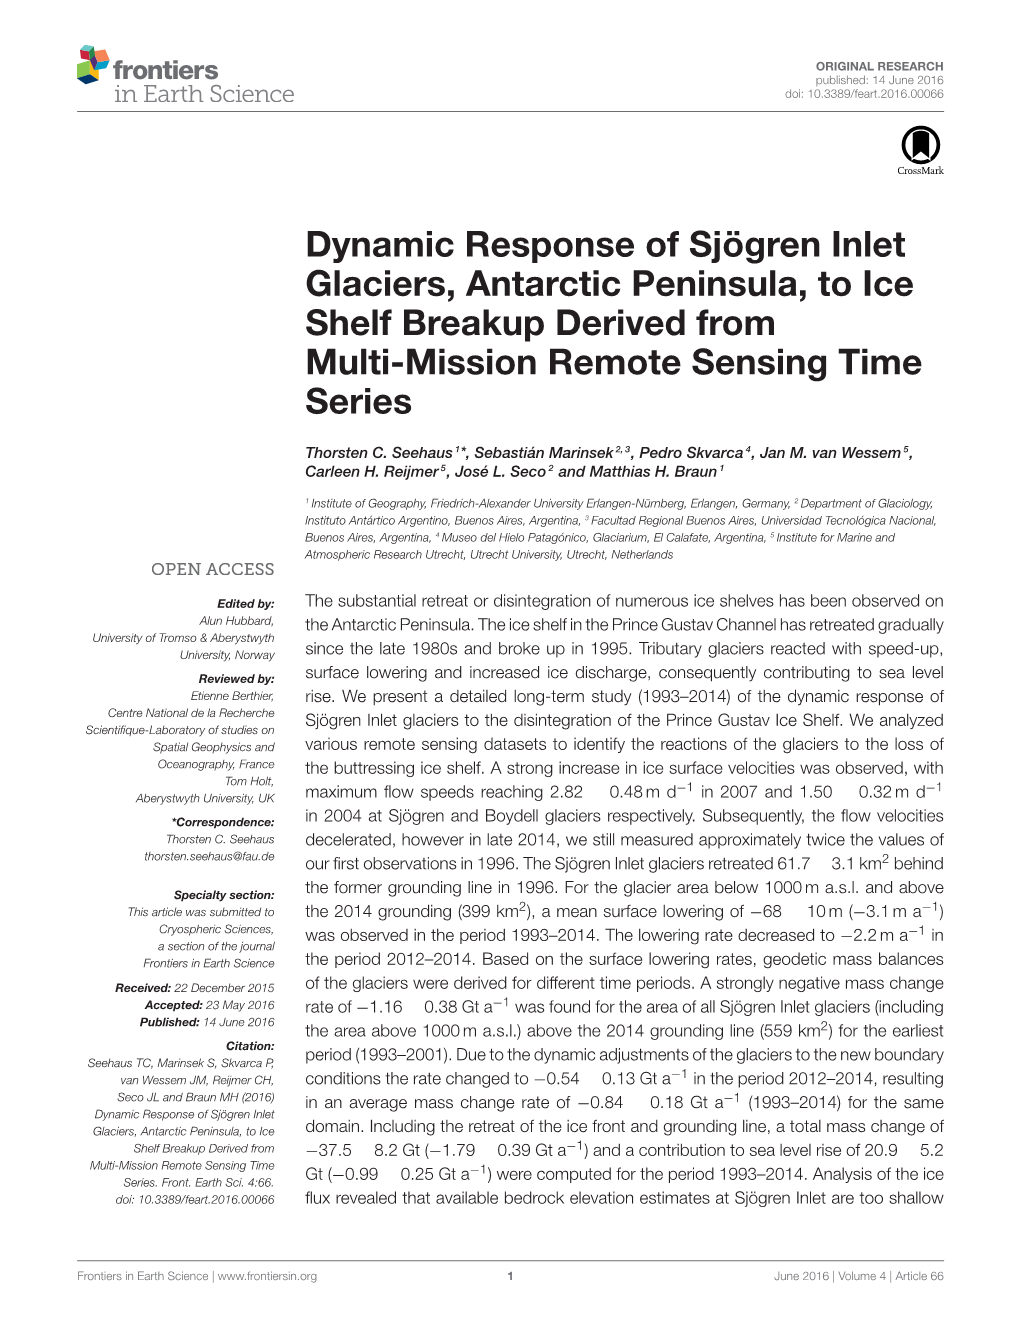 Dynamic Response of Sjögren Inlet Glaciers, Antarctic Peninsula, to Ice Shelf Breakup Derived from Multi-Mission Remote Sensing Time Series